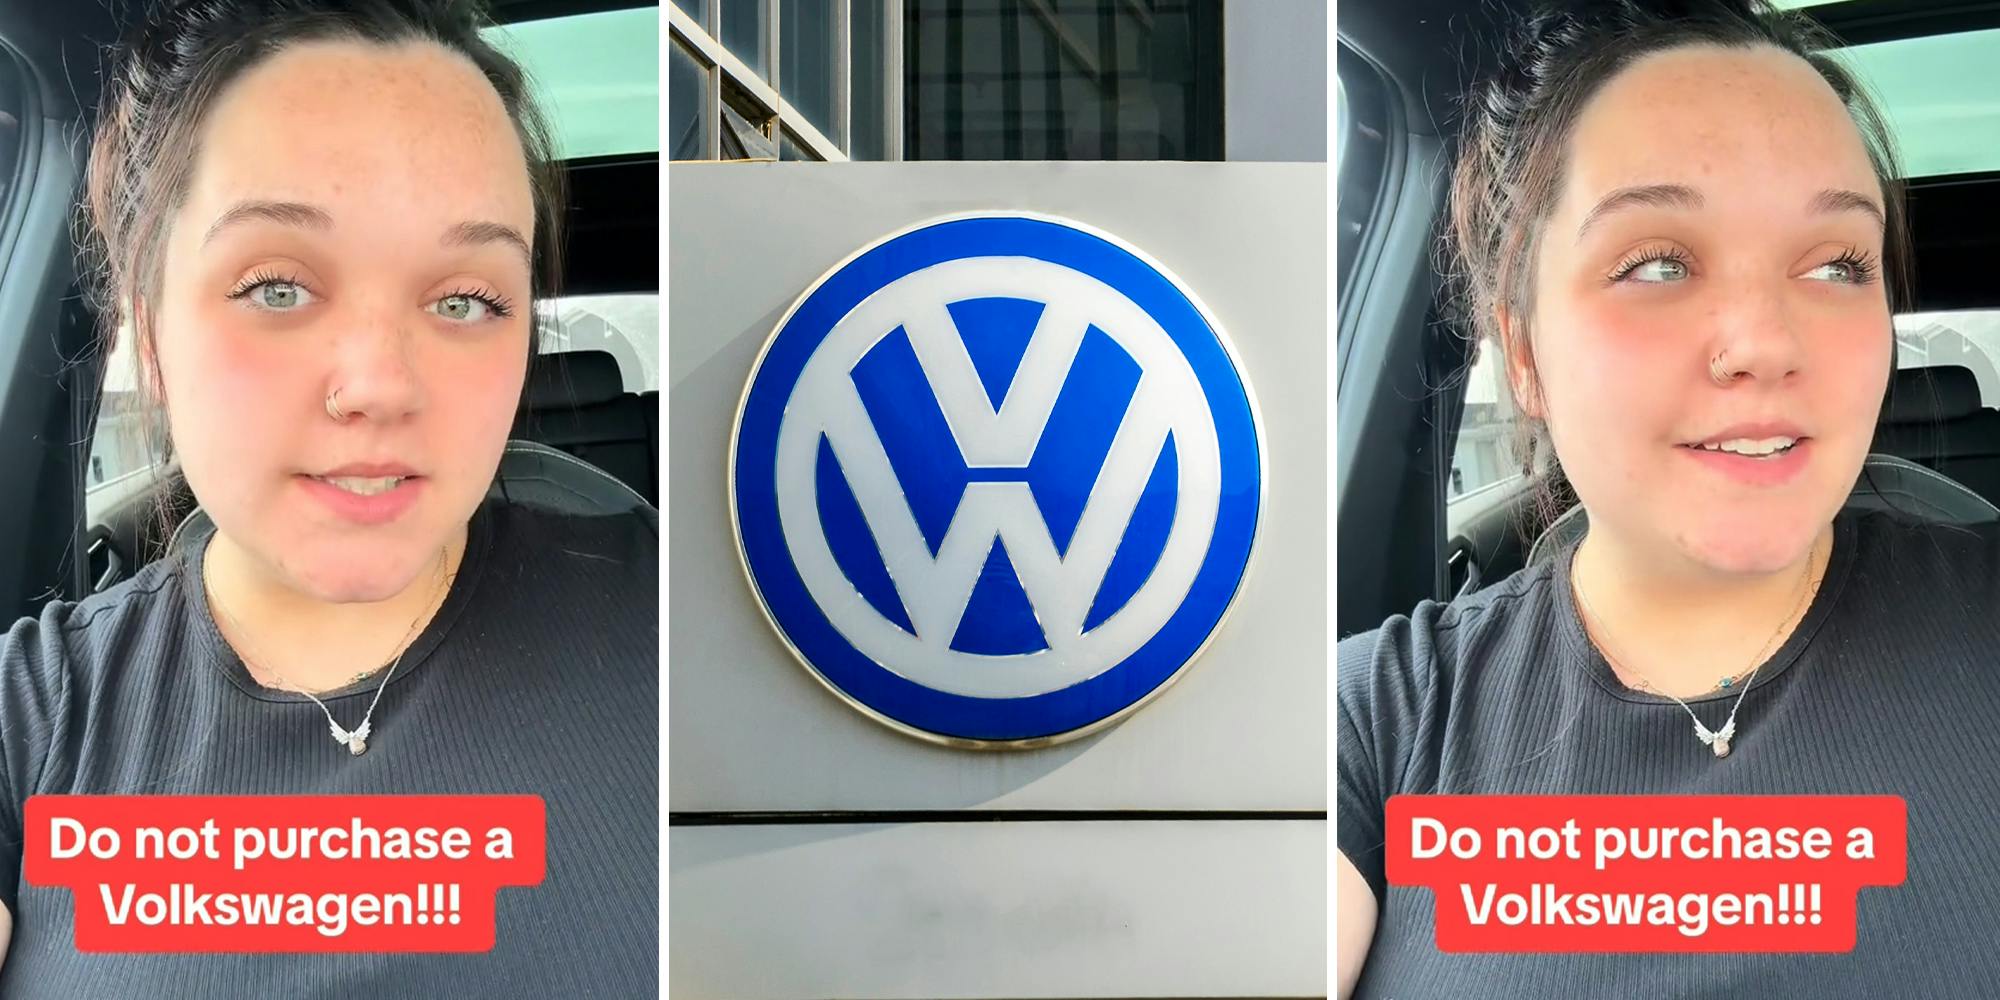 ‘I will not be accepting Volkswagen’s offer’: VW driver says you should avoid the carmaker after how they handled the car issues